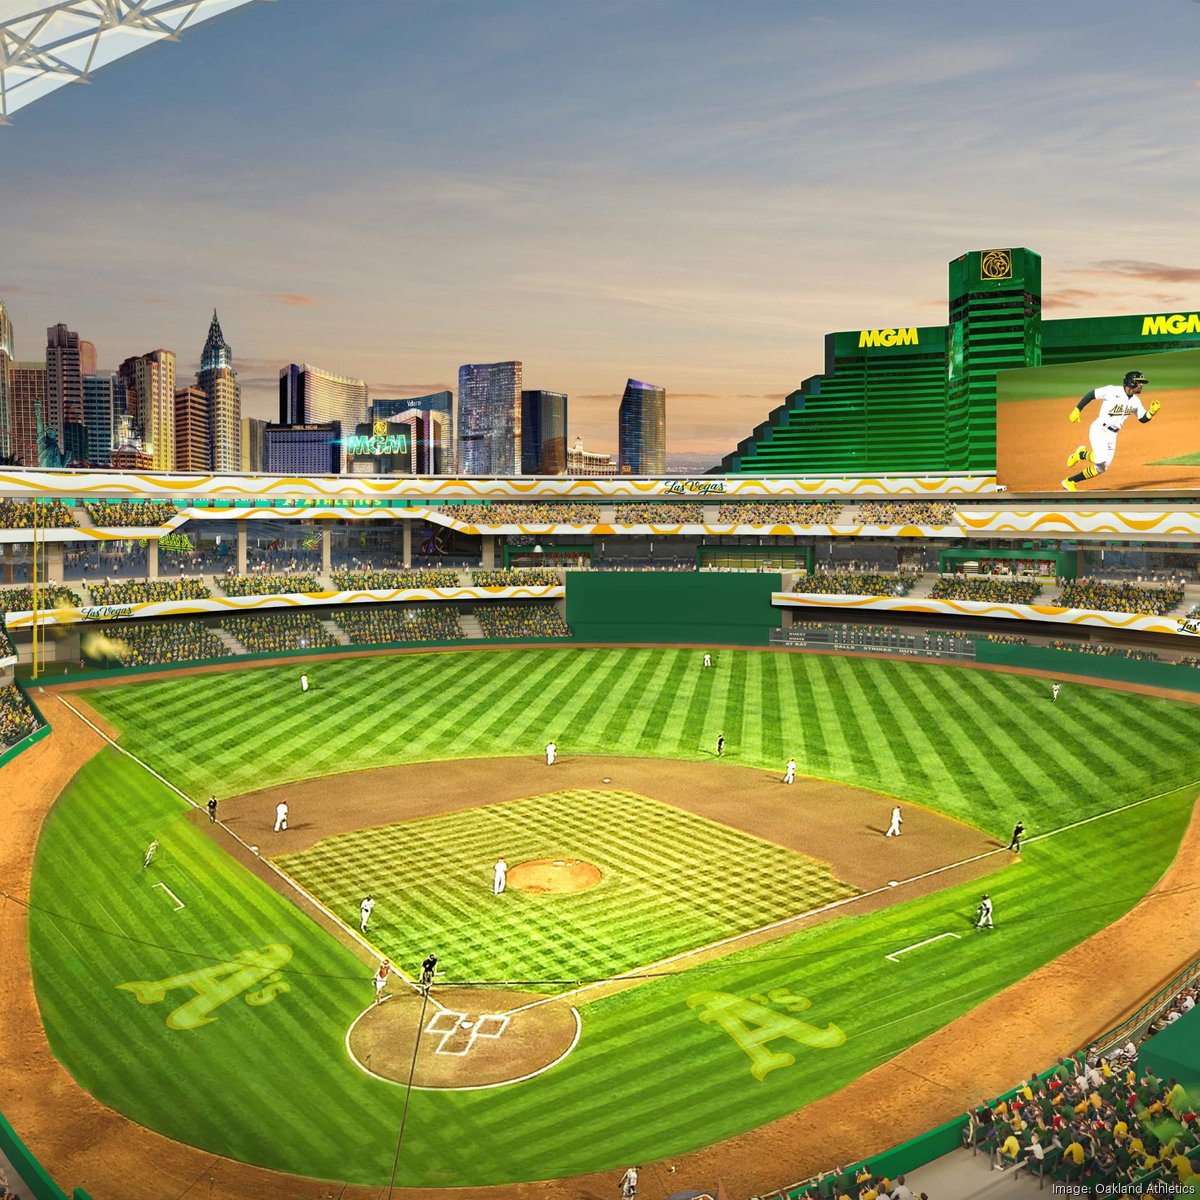 Survey finds most Clark County residents support A's stadium plan